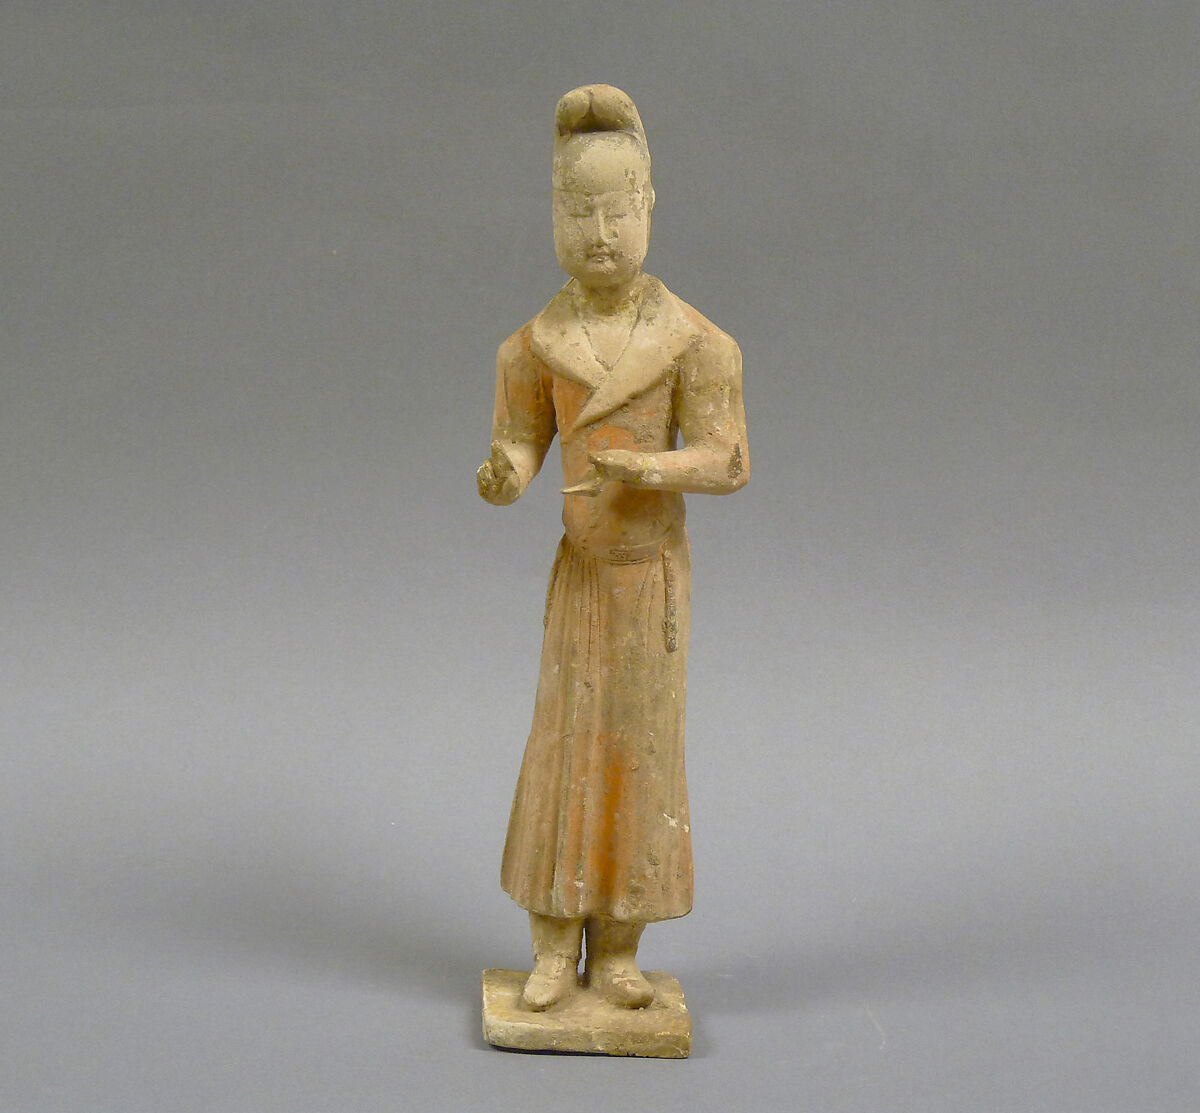 Male attendant, Earthenware with pigment, China 